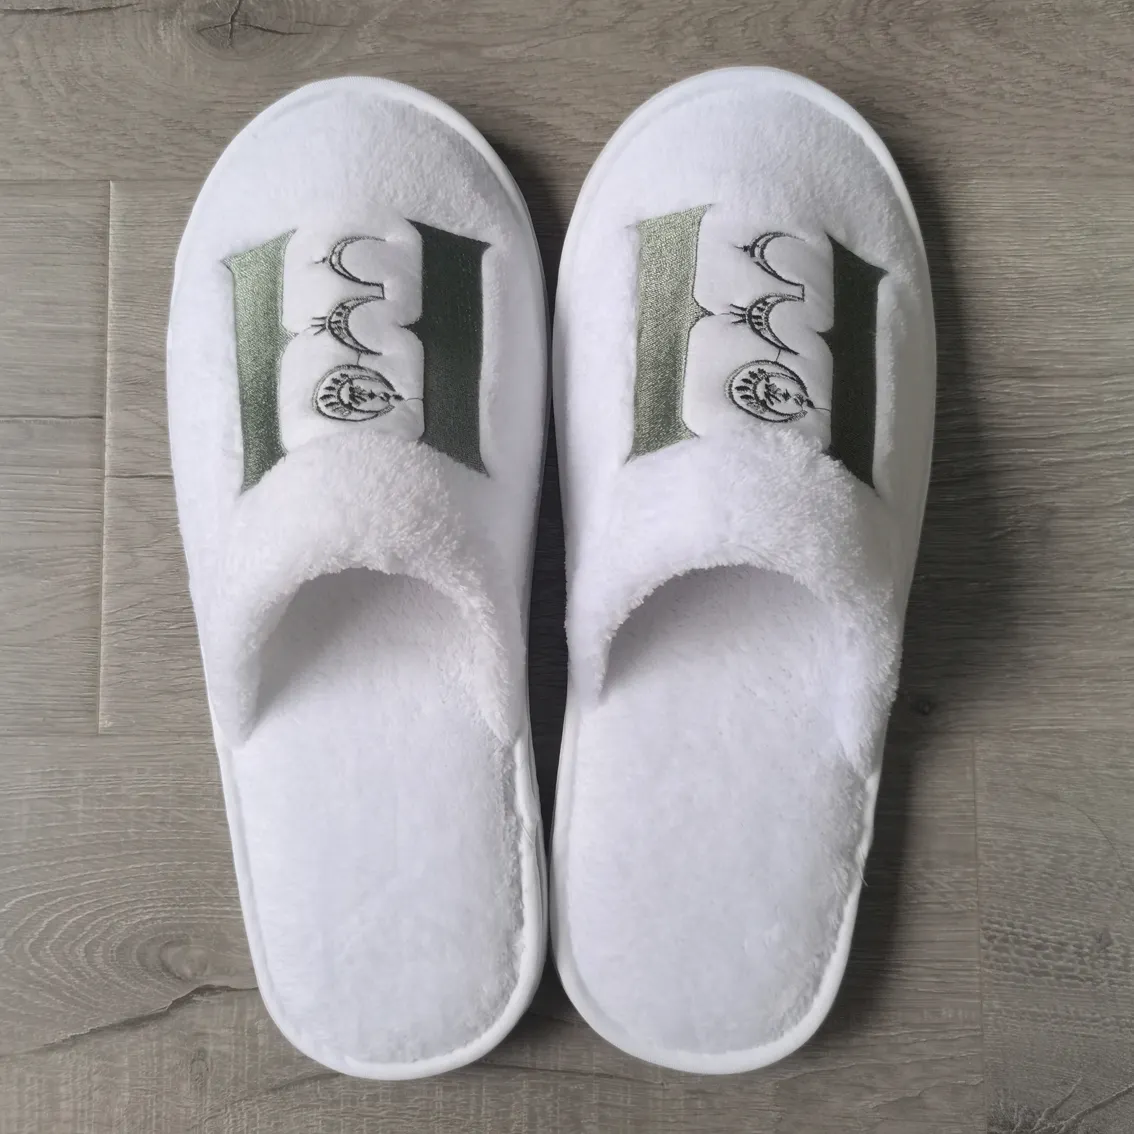 Luxury hotel slippers thickened coral velvet disposable slippers top fashion design custom logo special sale wholesale